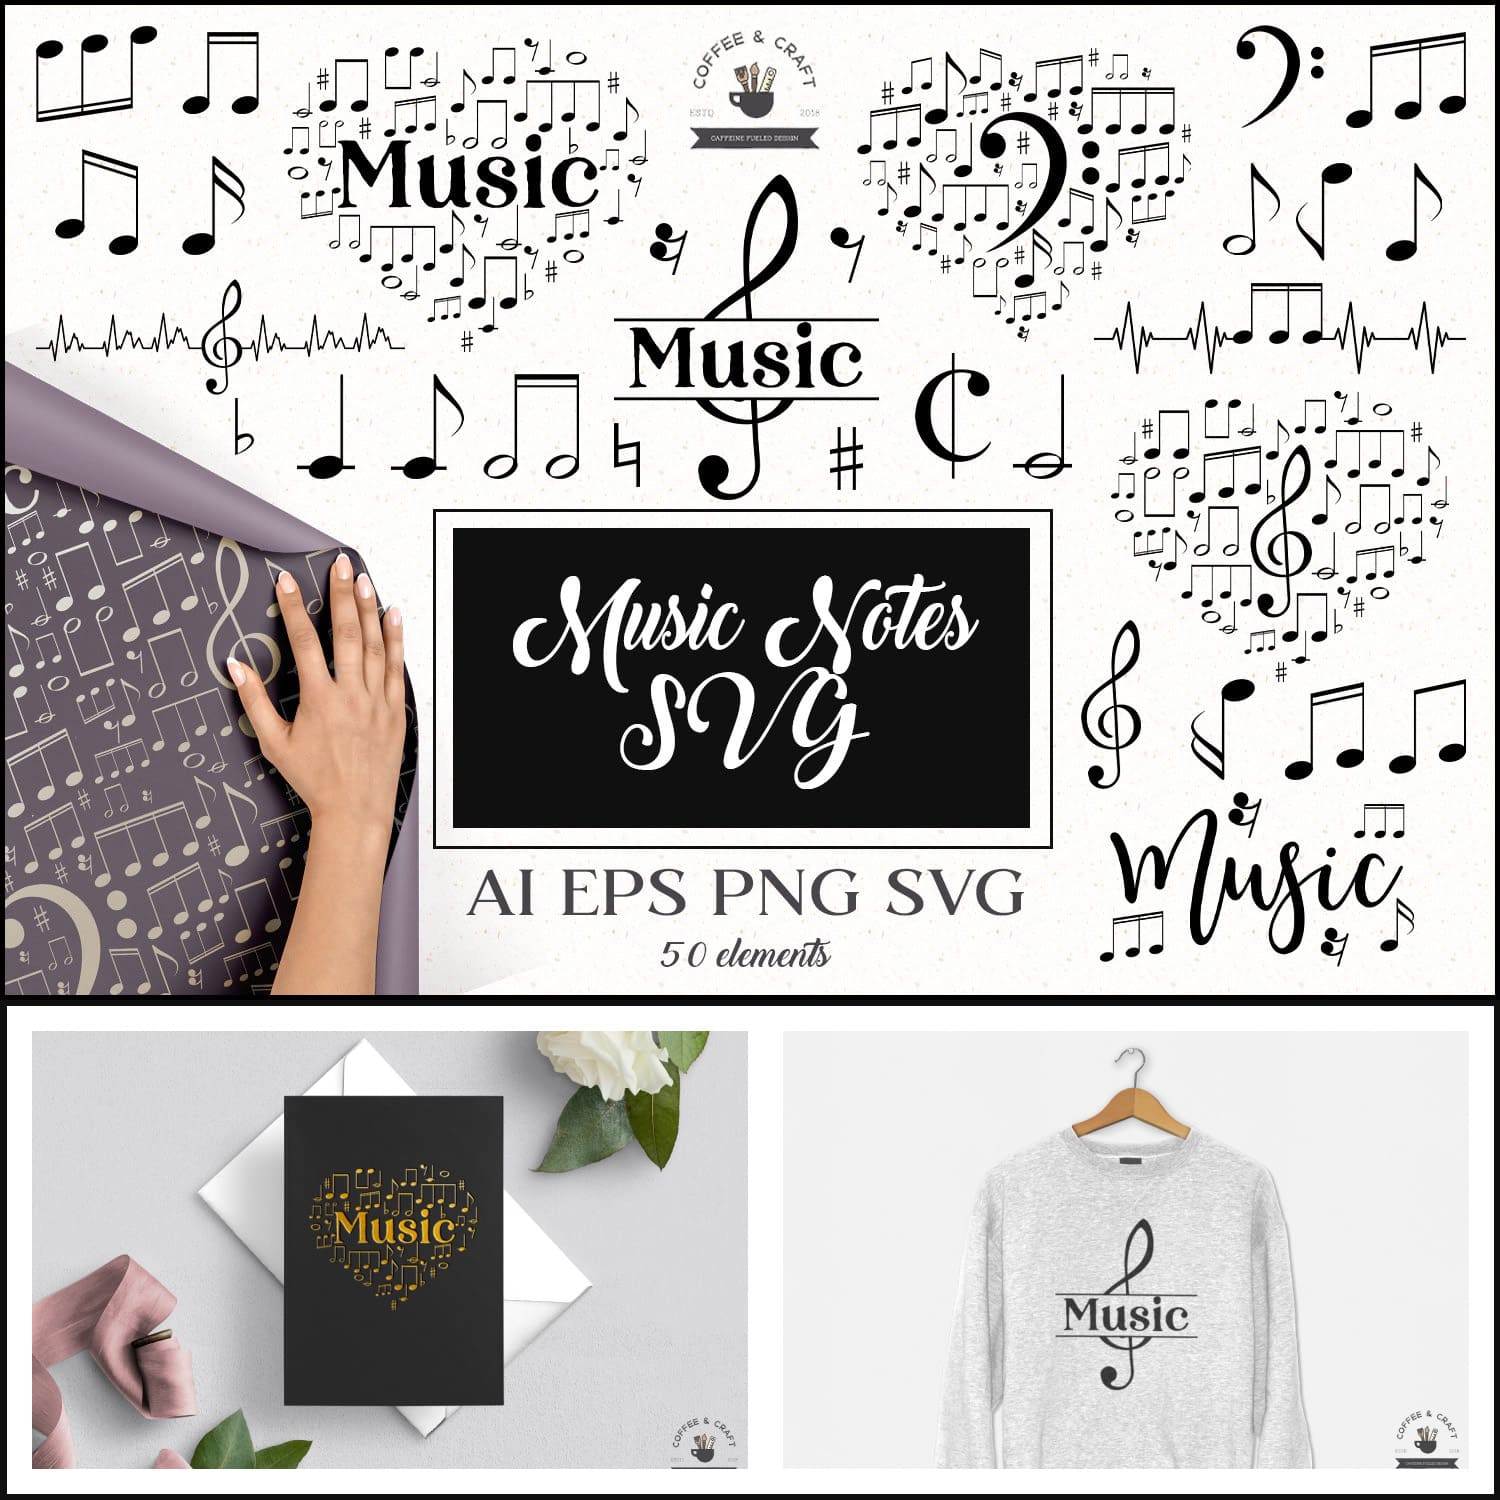 Music Notes SVG.